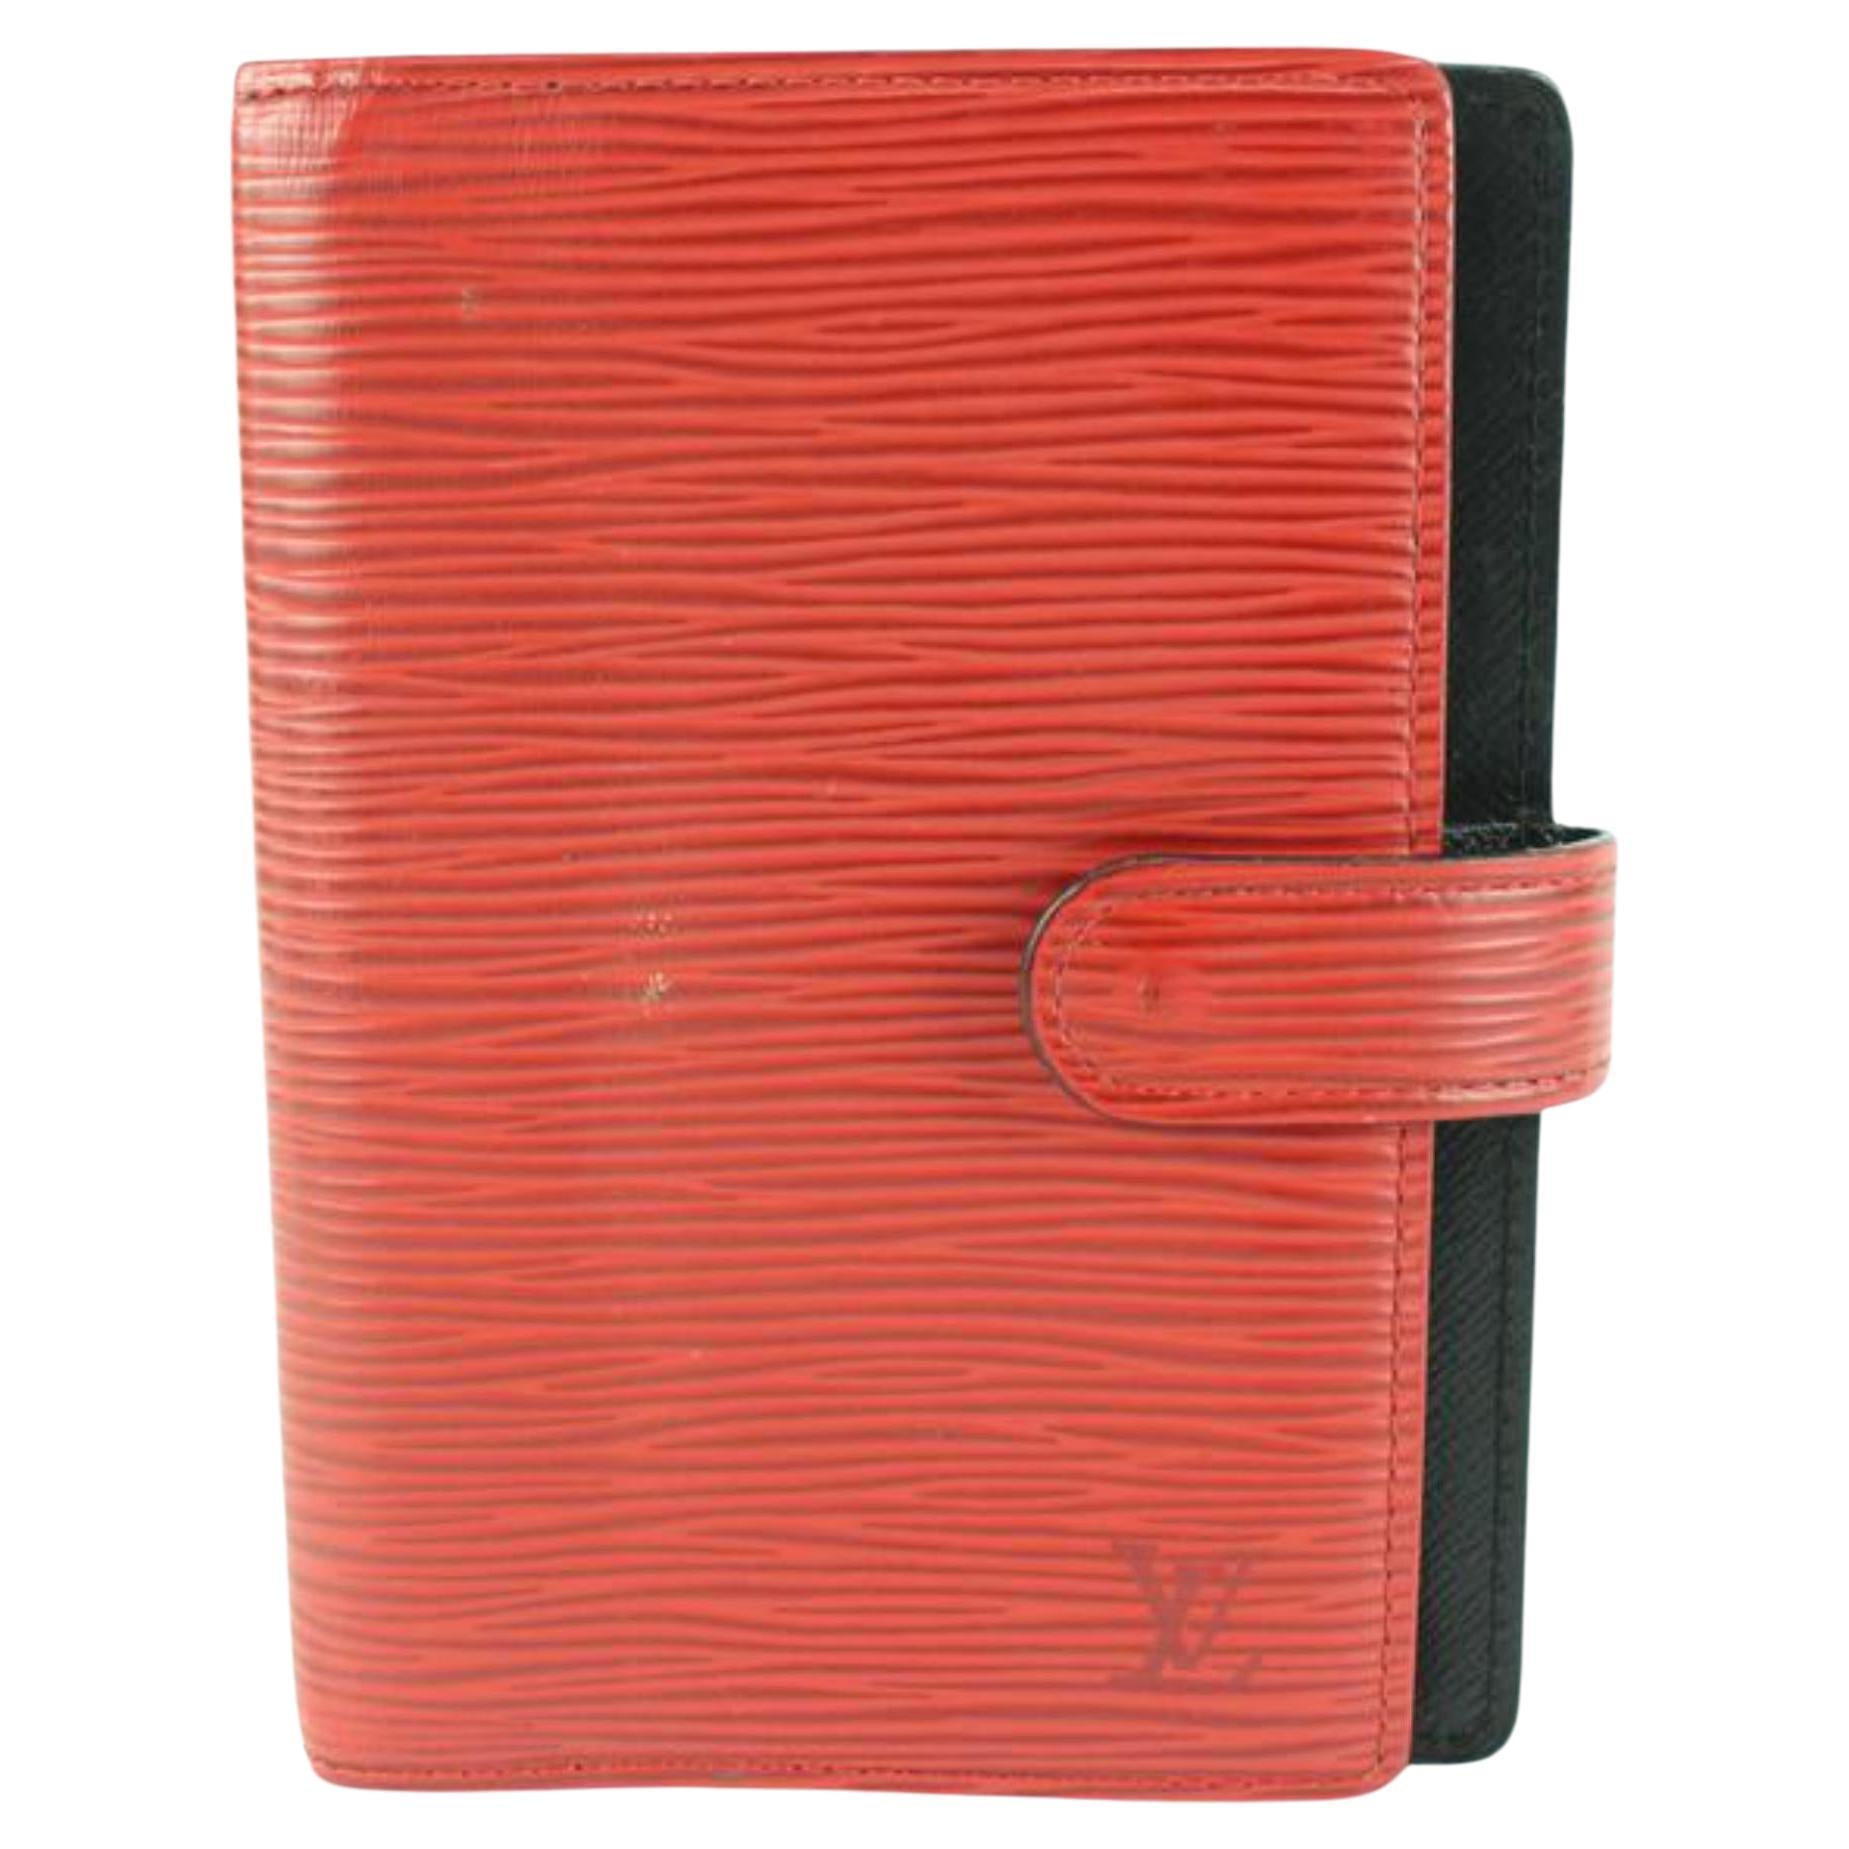 Louis Vuitton Red Epi Leather Small Ring Agenda PM 24lz510s For Sale